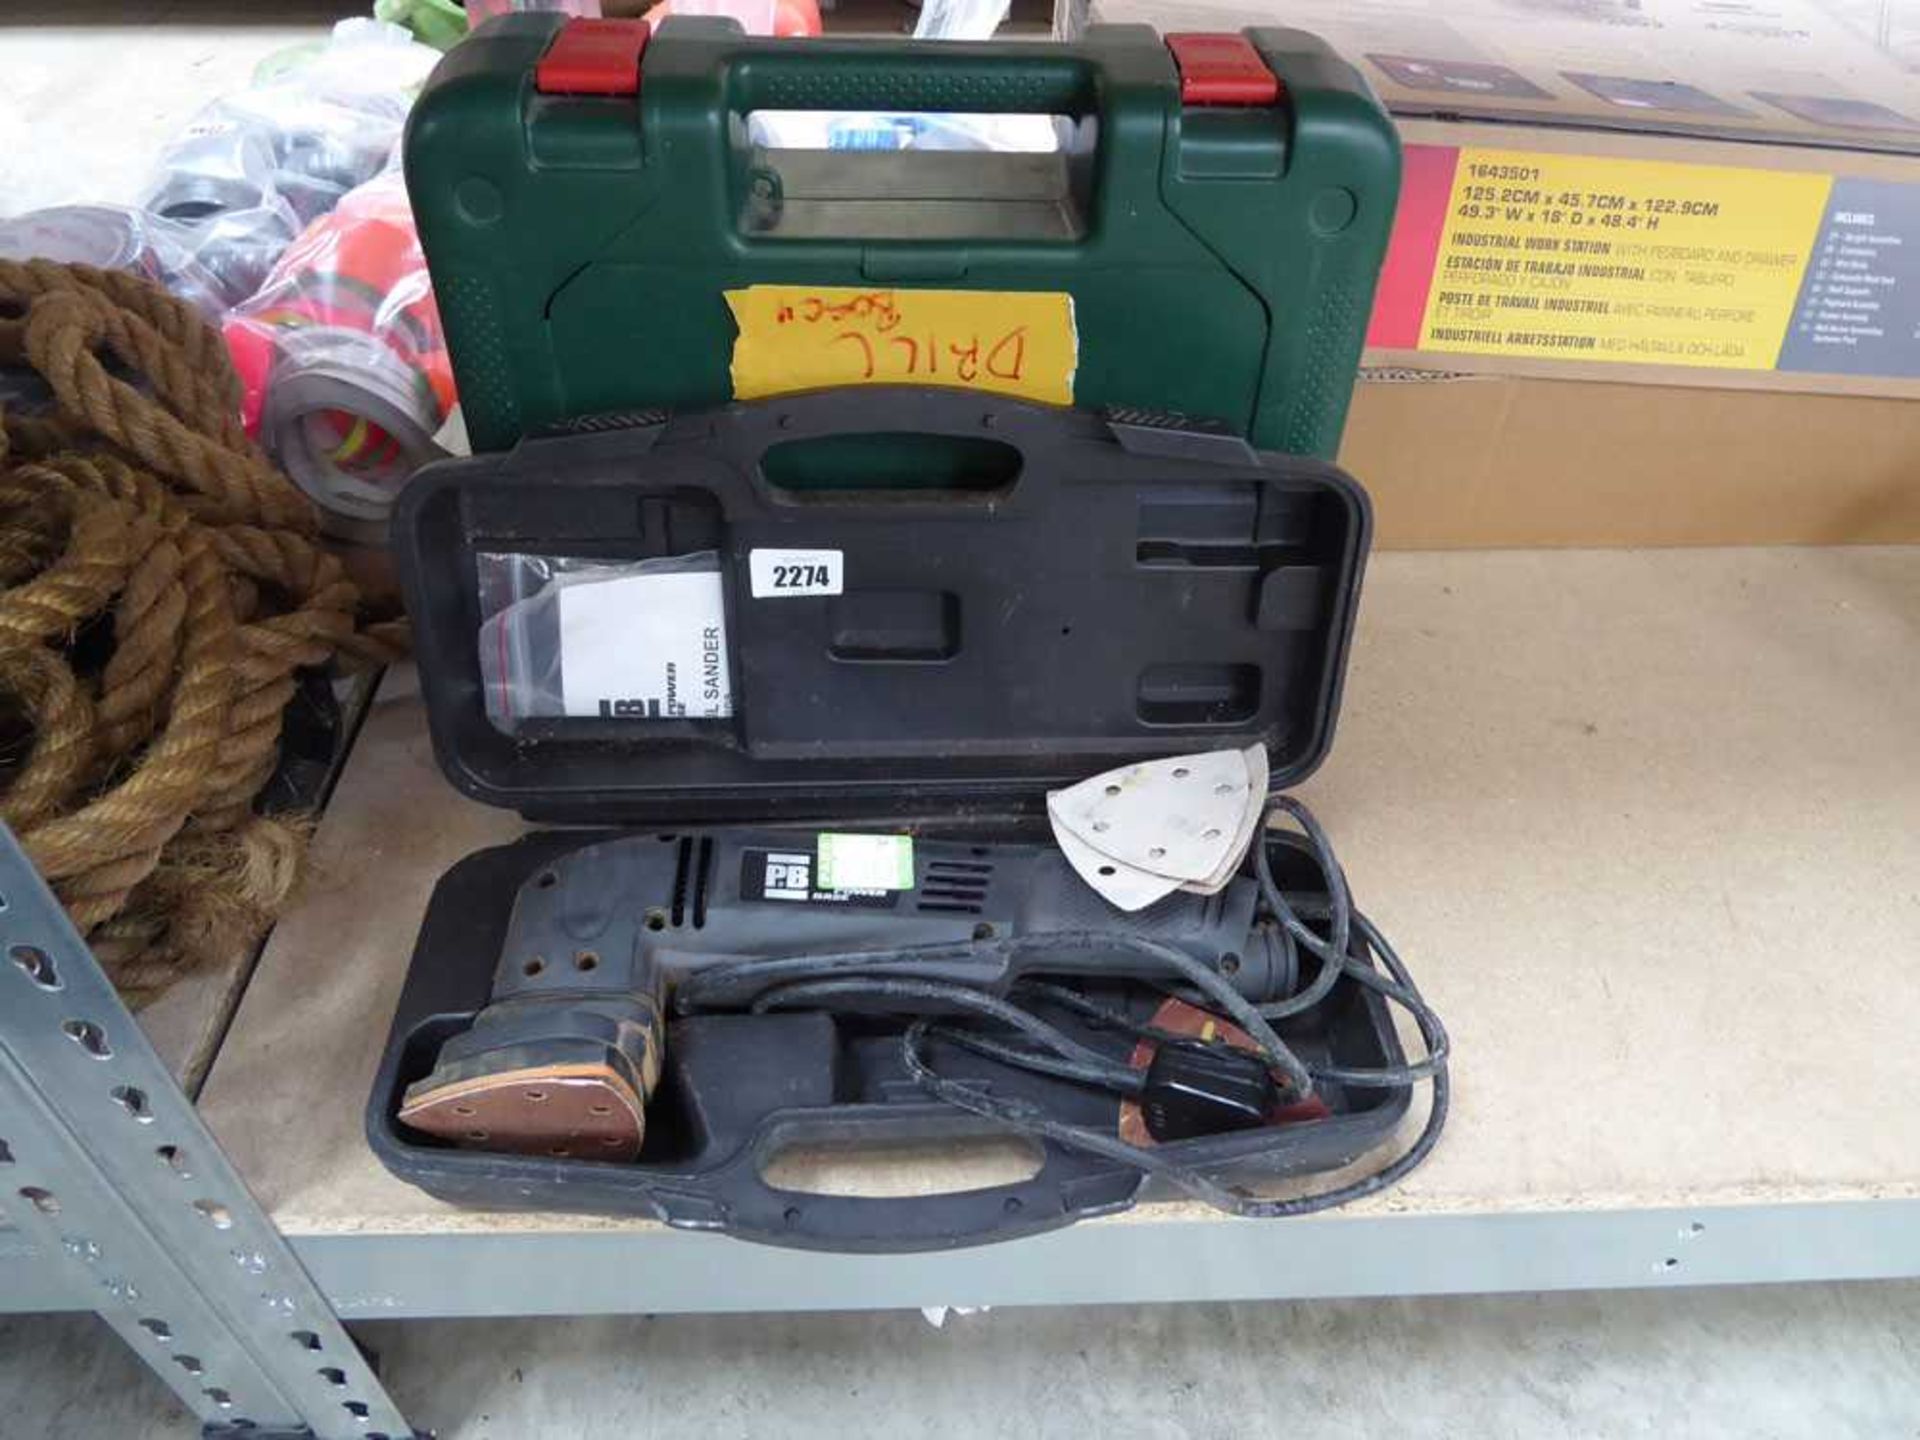 Cased sander together with Bosch electric drill